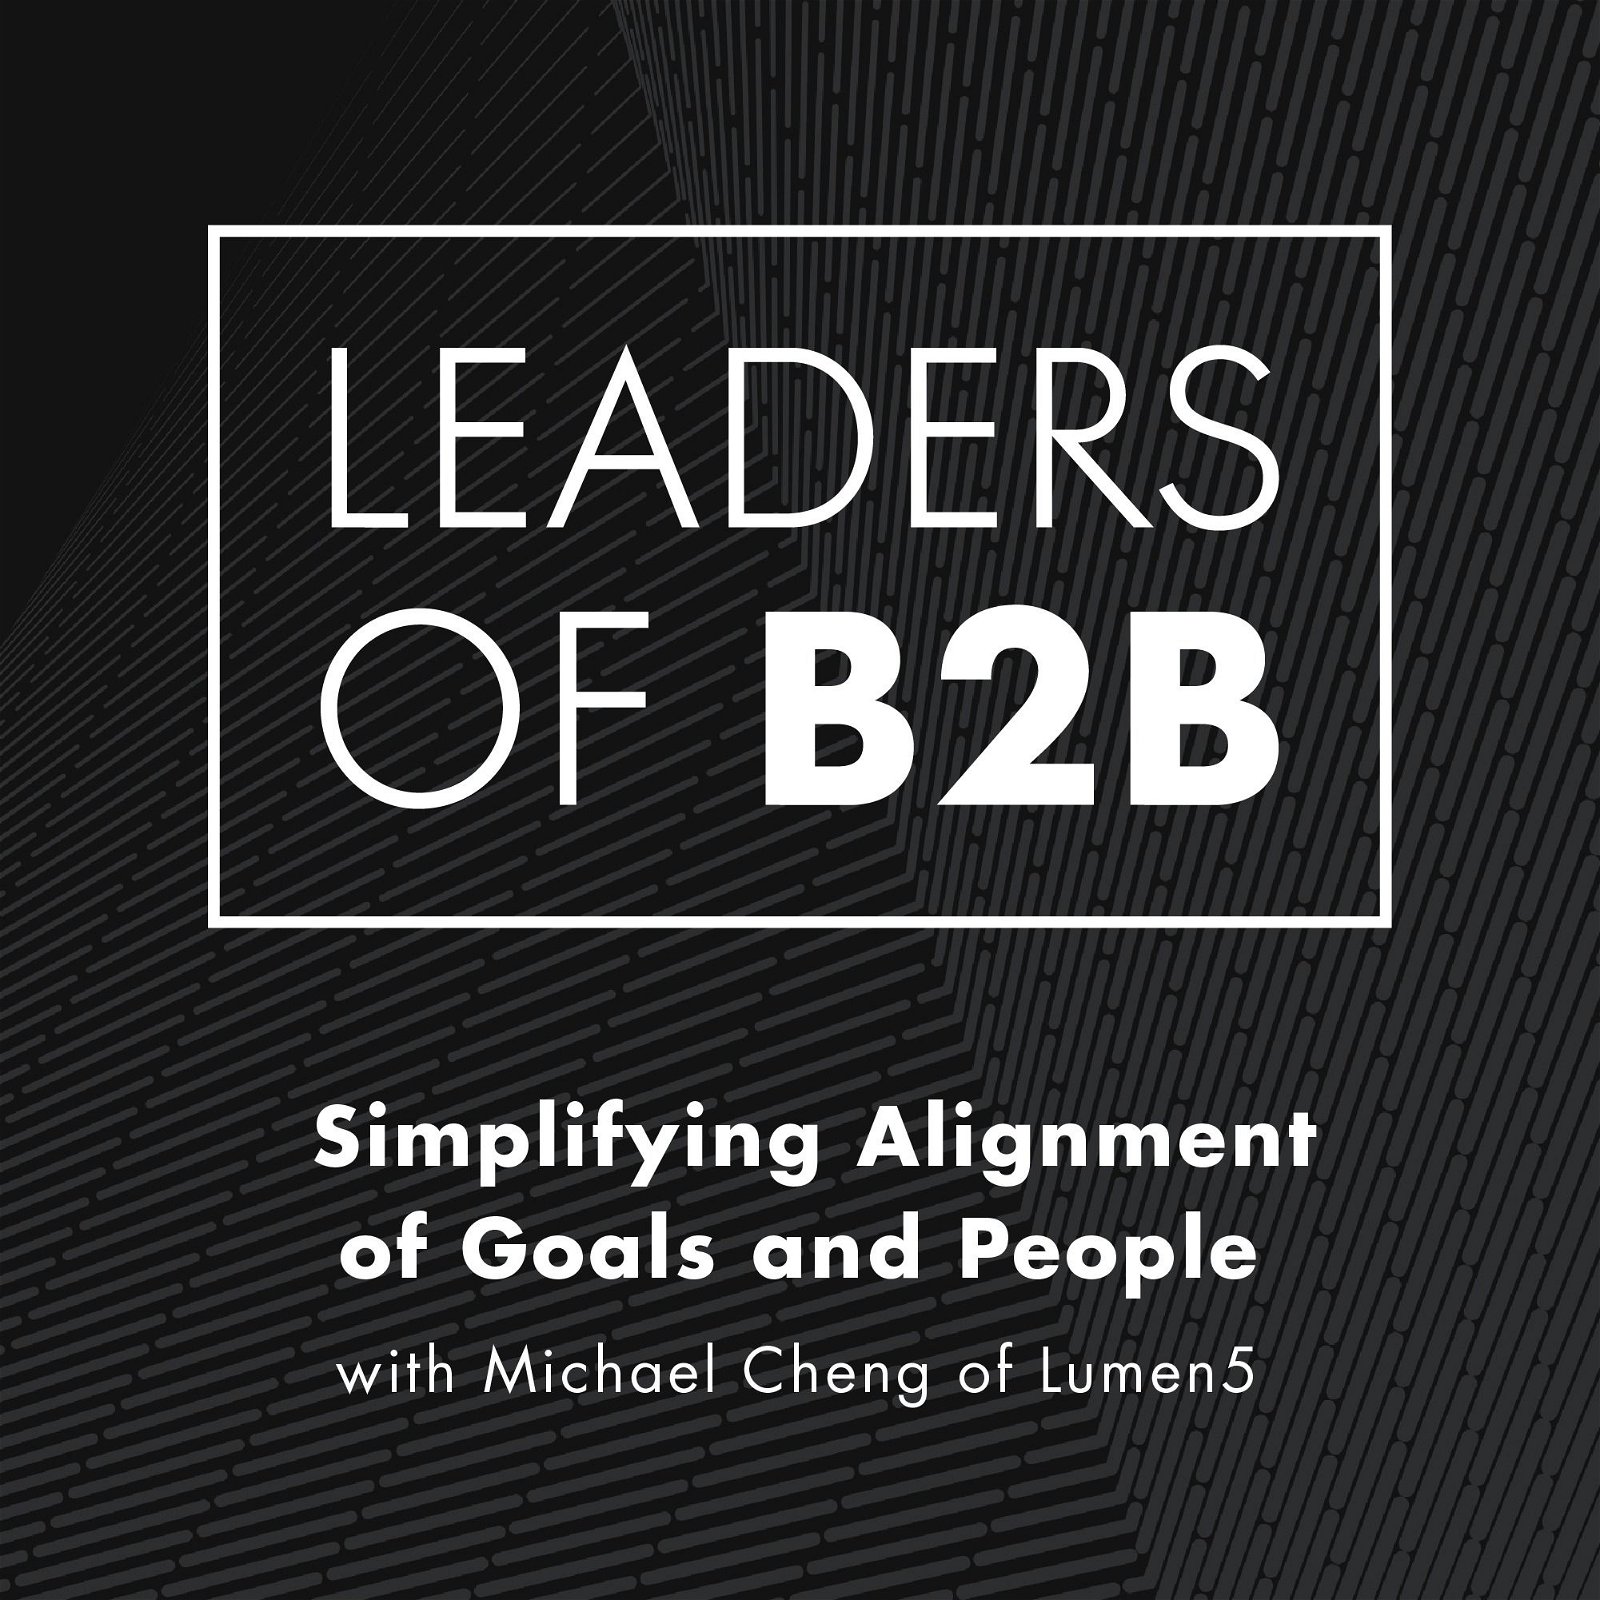 Simplifying Alignment of Goals and People, with Michael Cheng of Lumen5